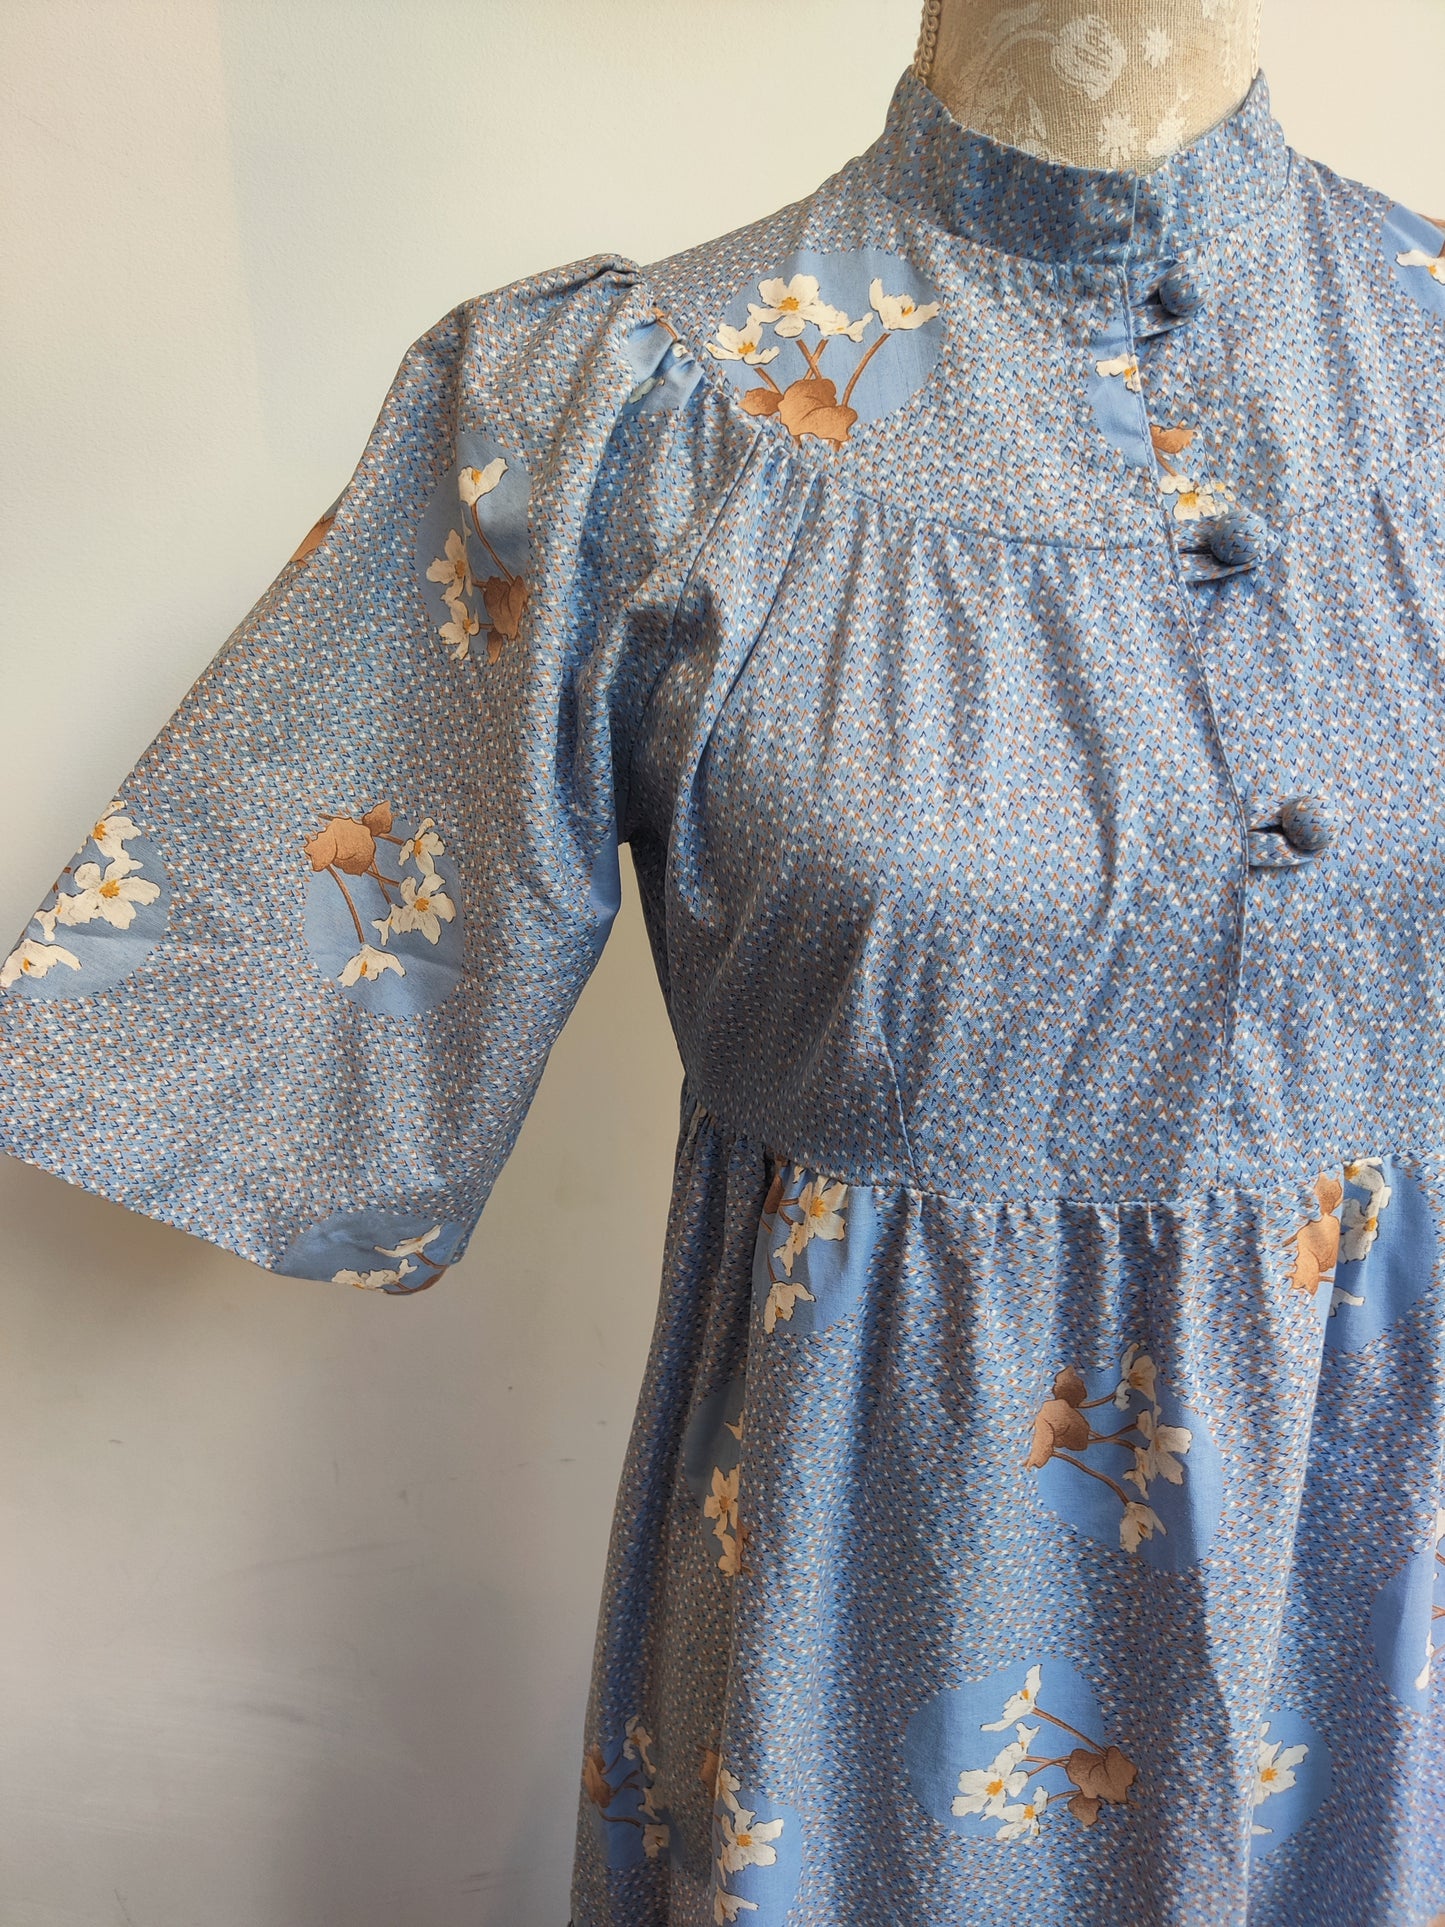 Beautiful floral prairie dress with short sleeves.